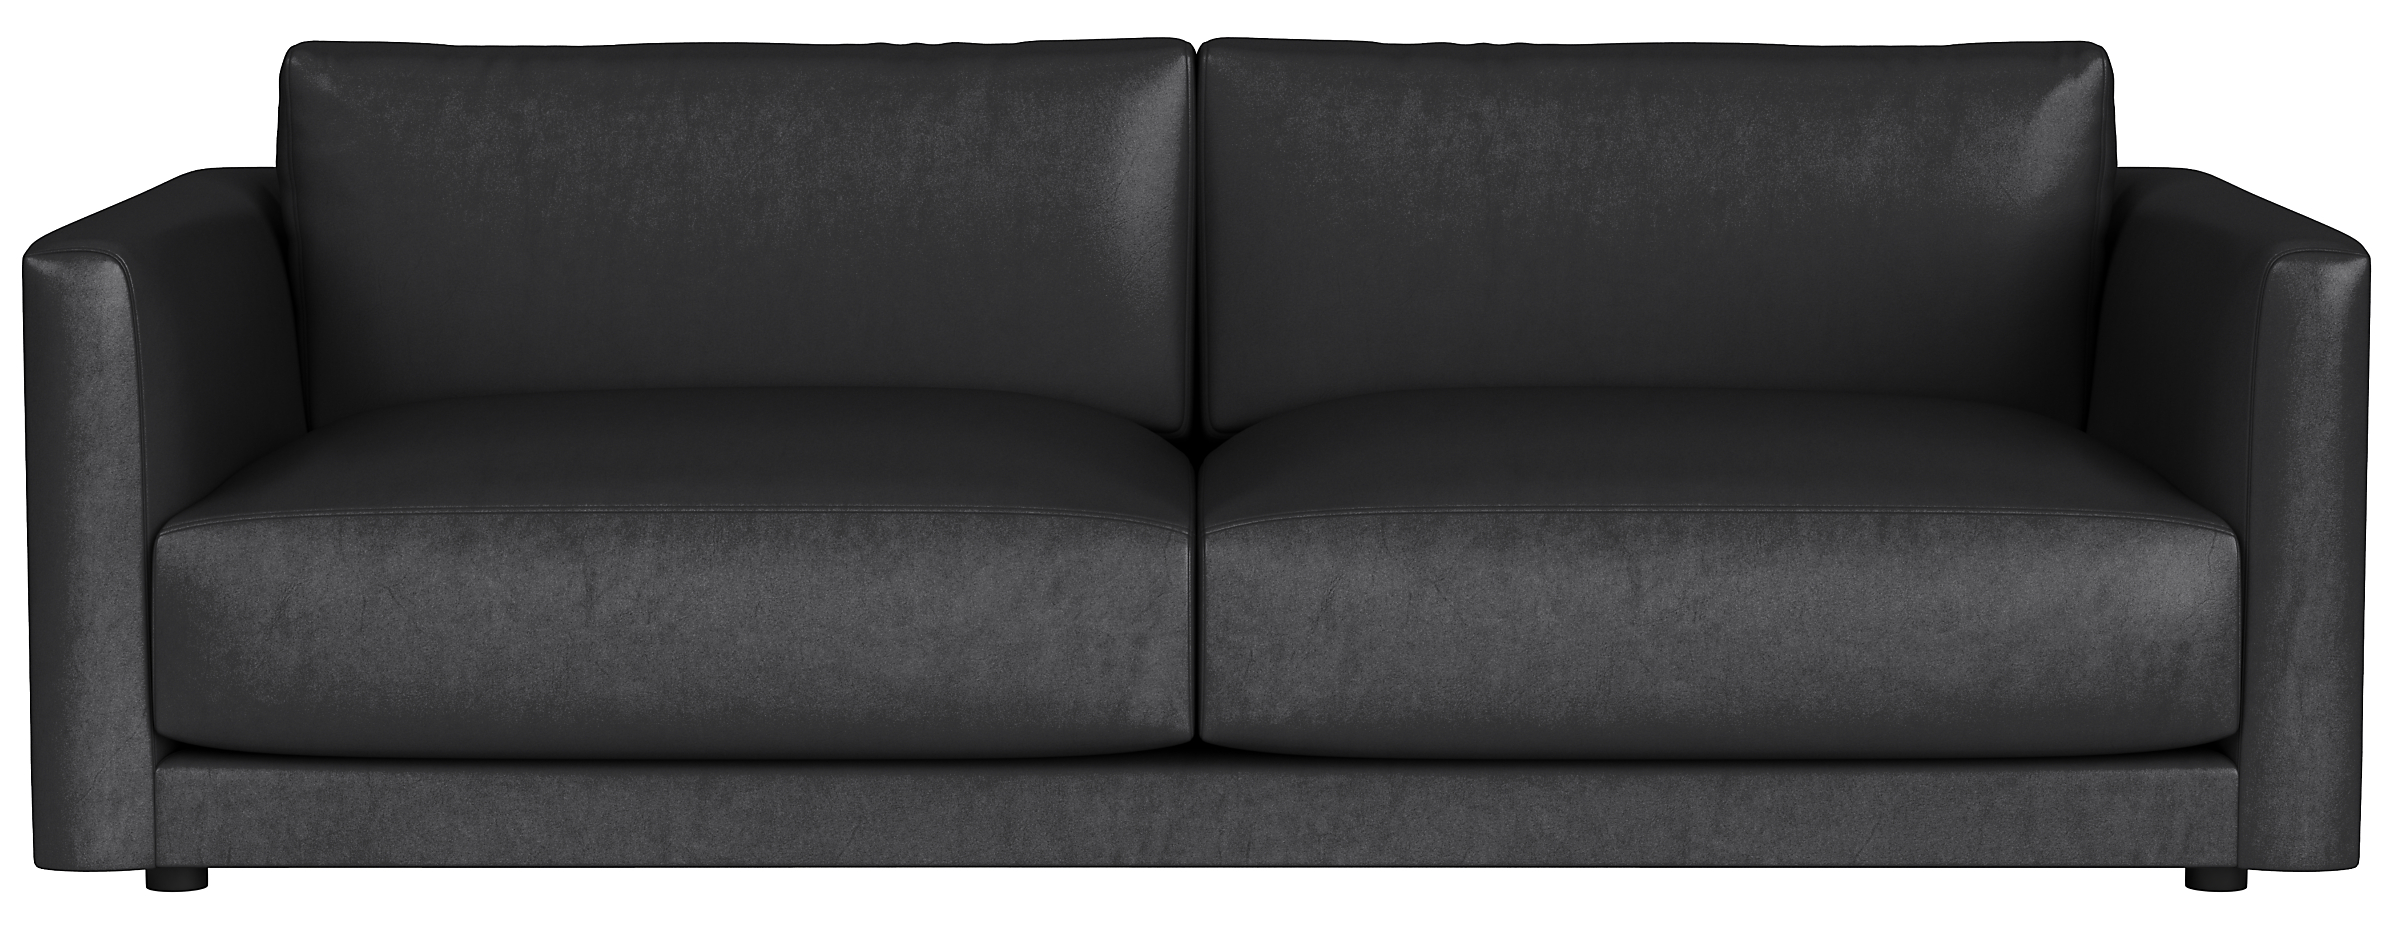 Clemens Leather Sofas